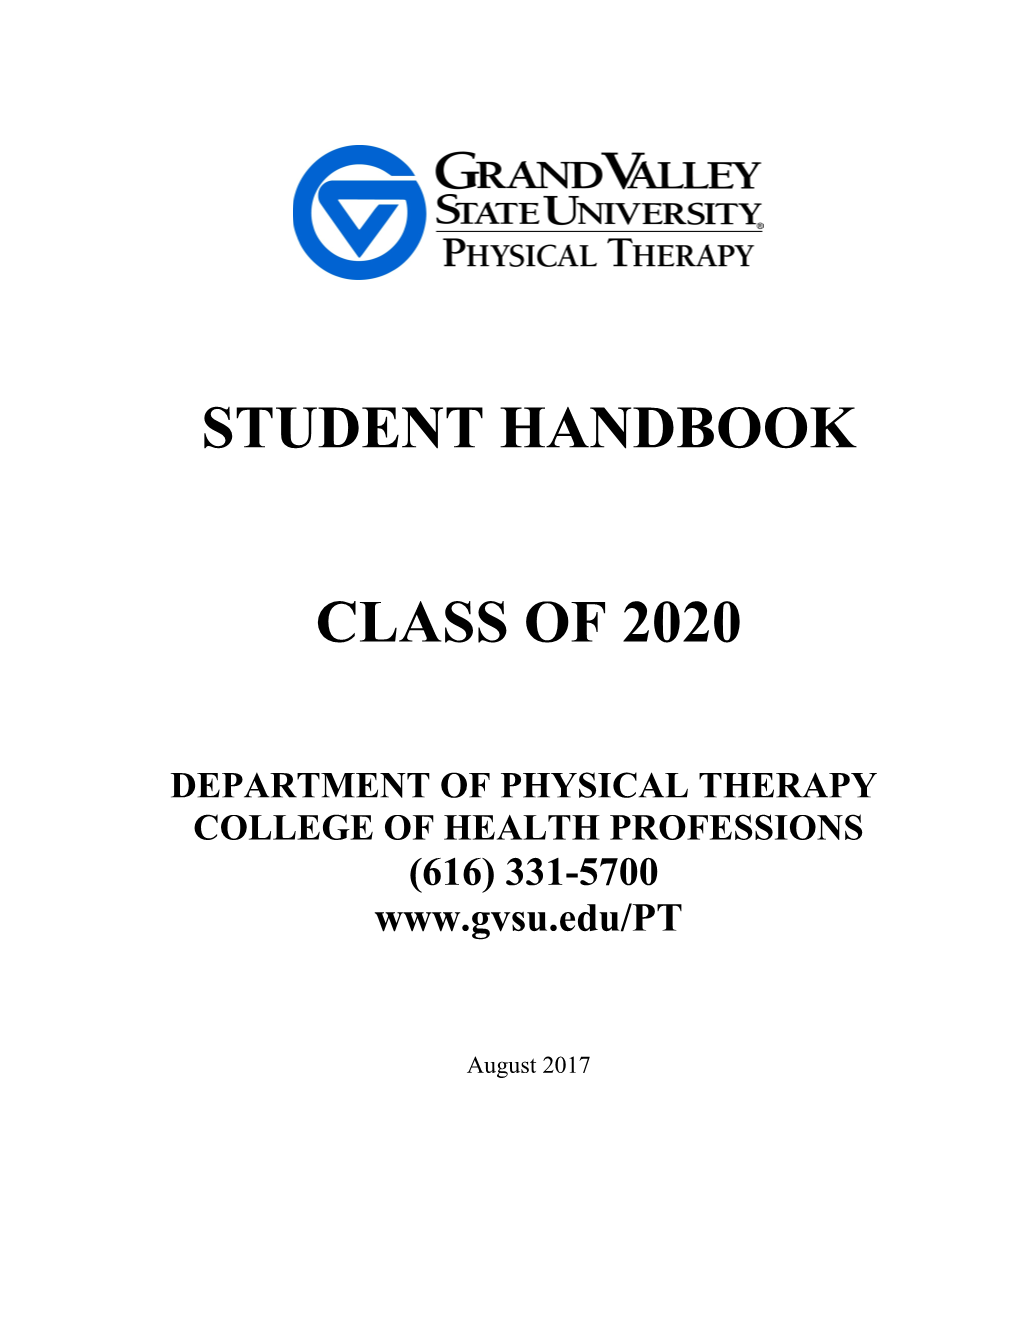 Department of Physical Therapy Student Handbook*